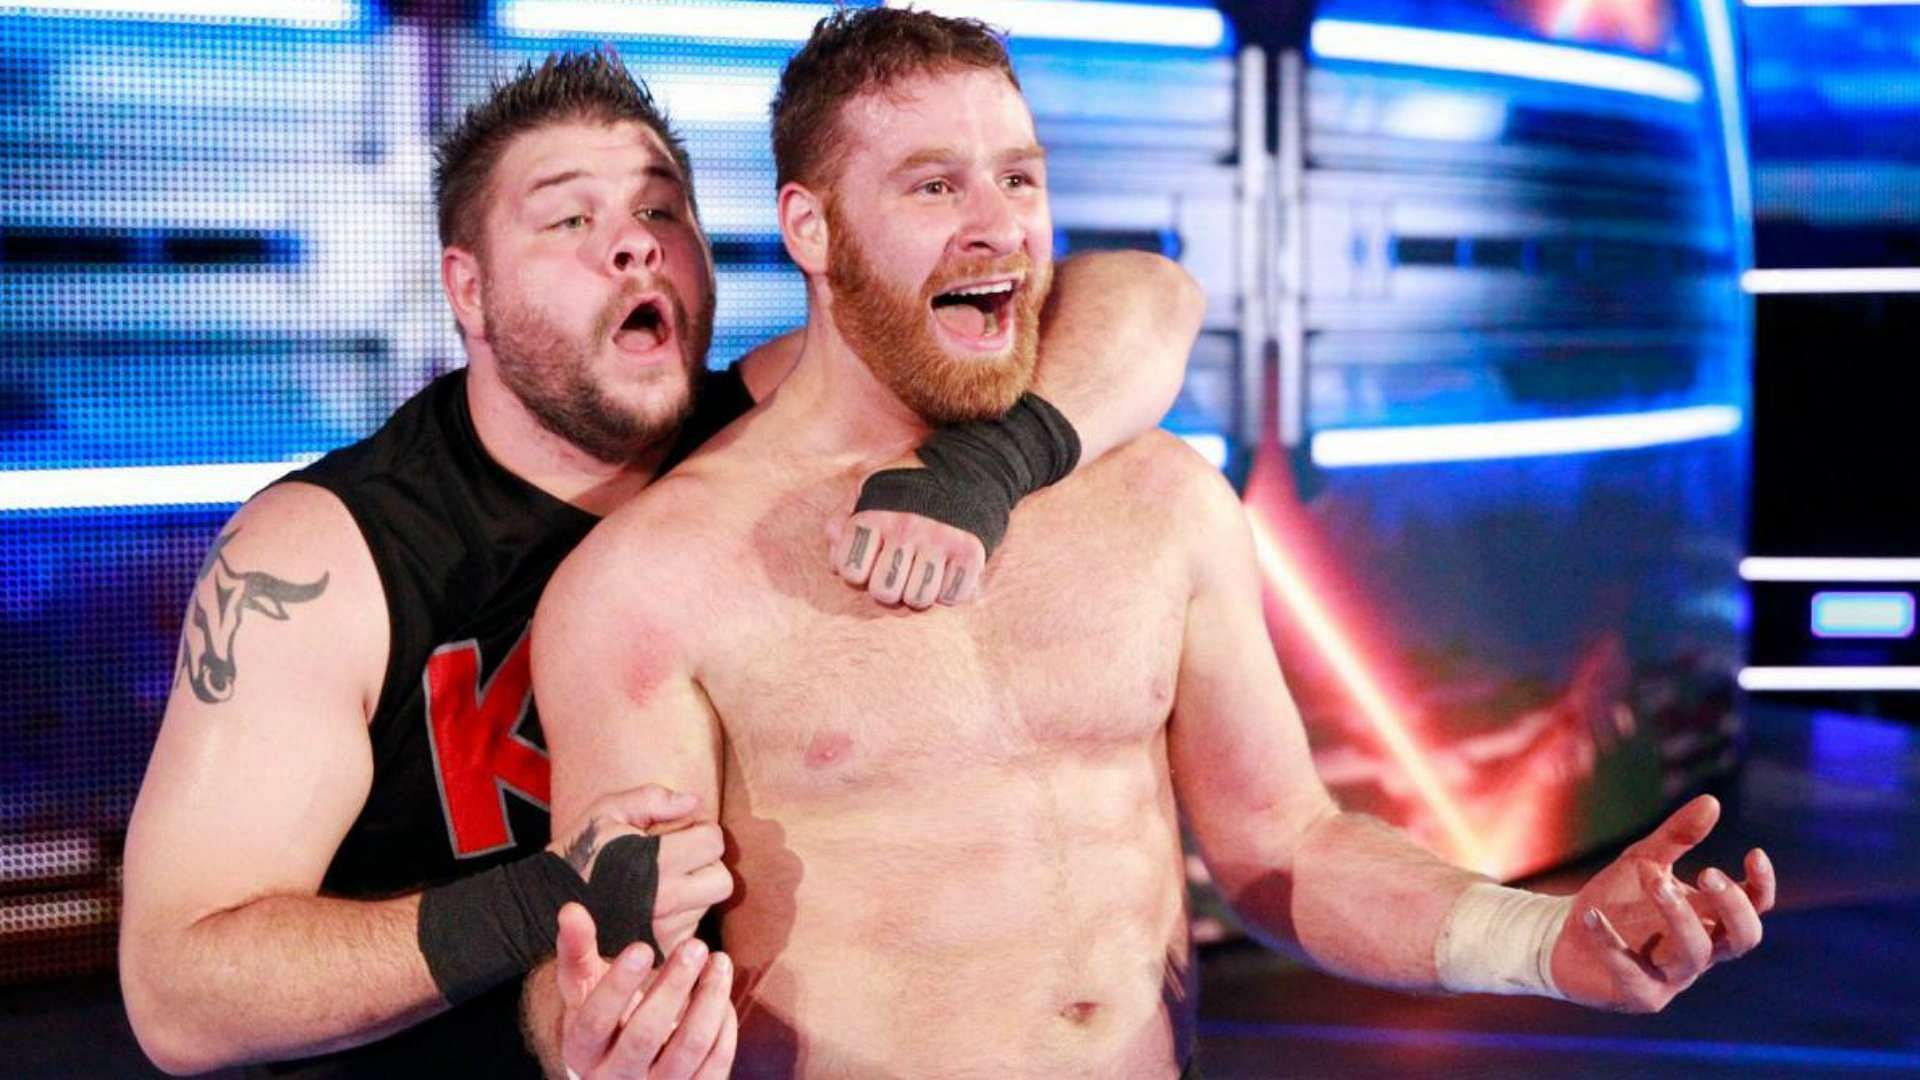 Kevin Owens and Sami Zayn are best friends in real life.